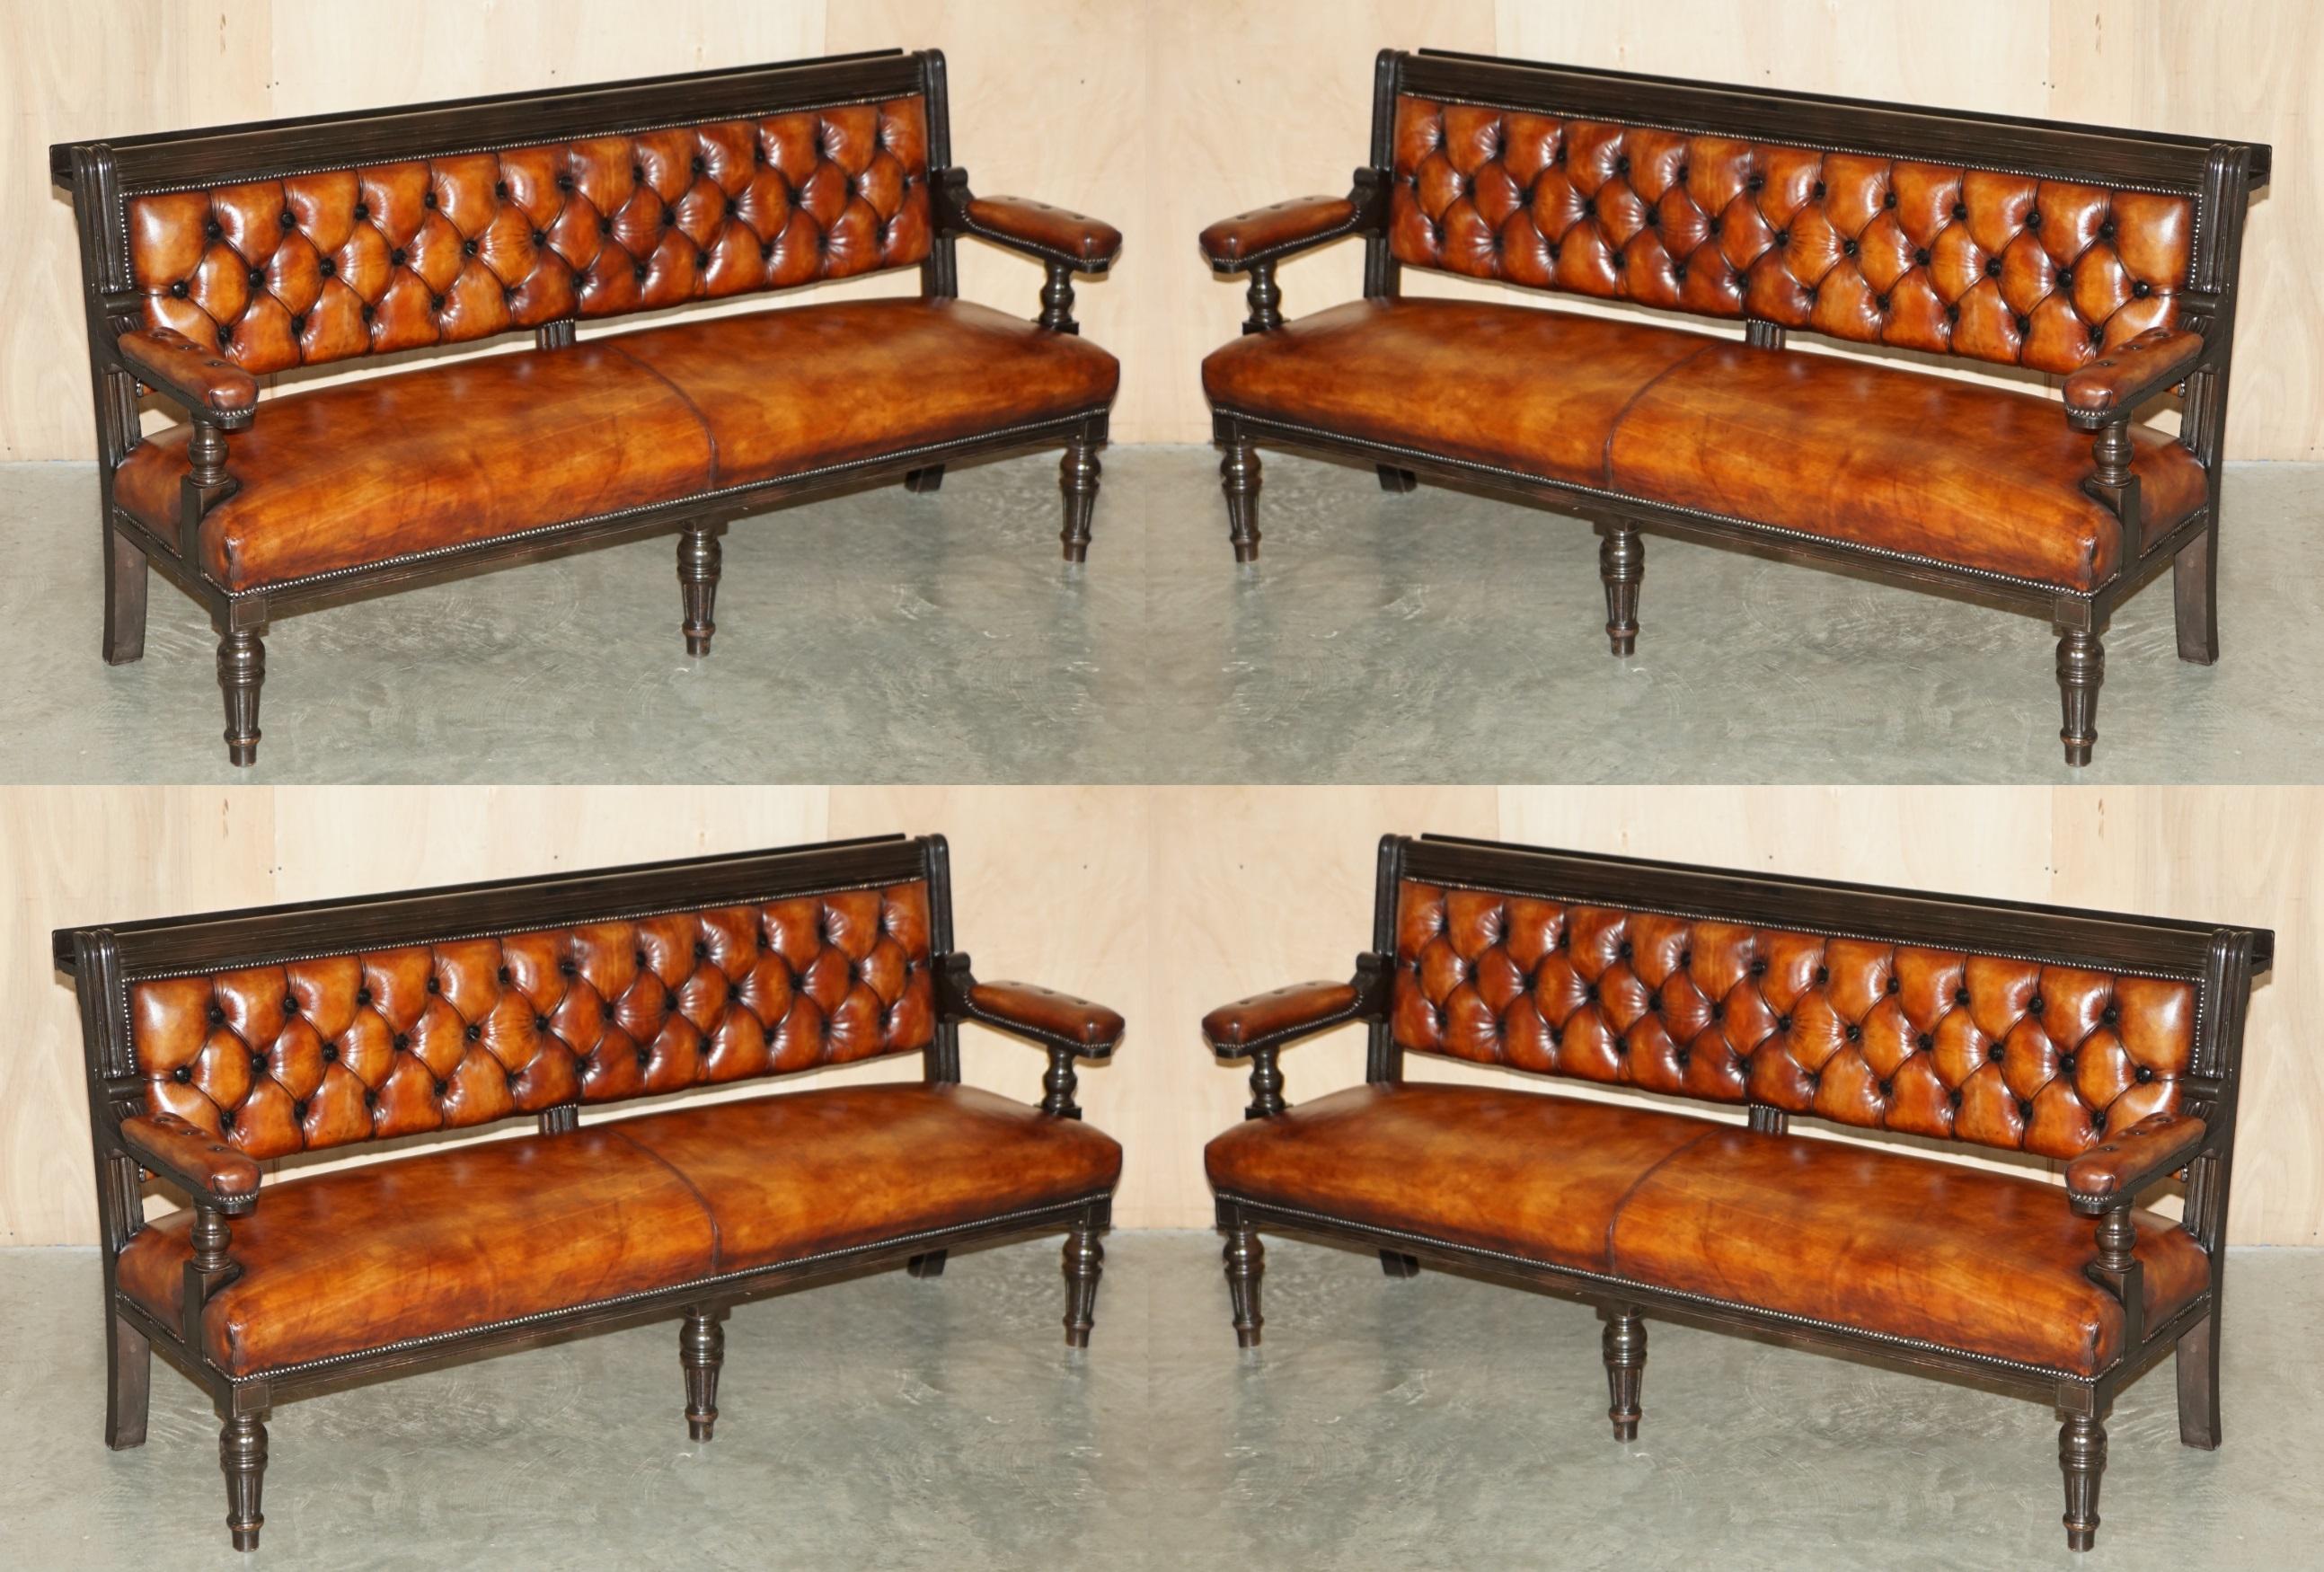 Royal House Antiques

Royal House Antiques is delighted to offer for sale one of four absolutely stunning, fully restored extra large Victorian Snooker hall pub benches with new Italian leather upholstery that has been hand dyed

Please note the